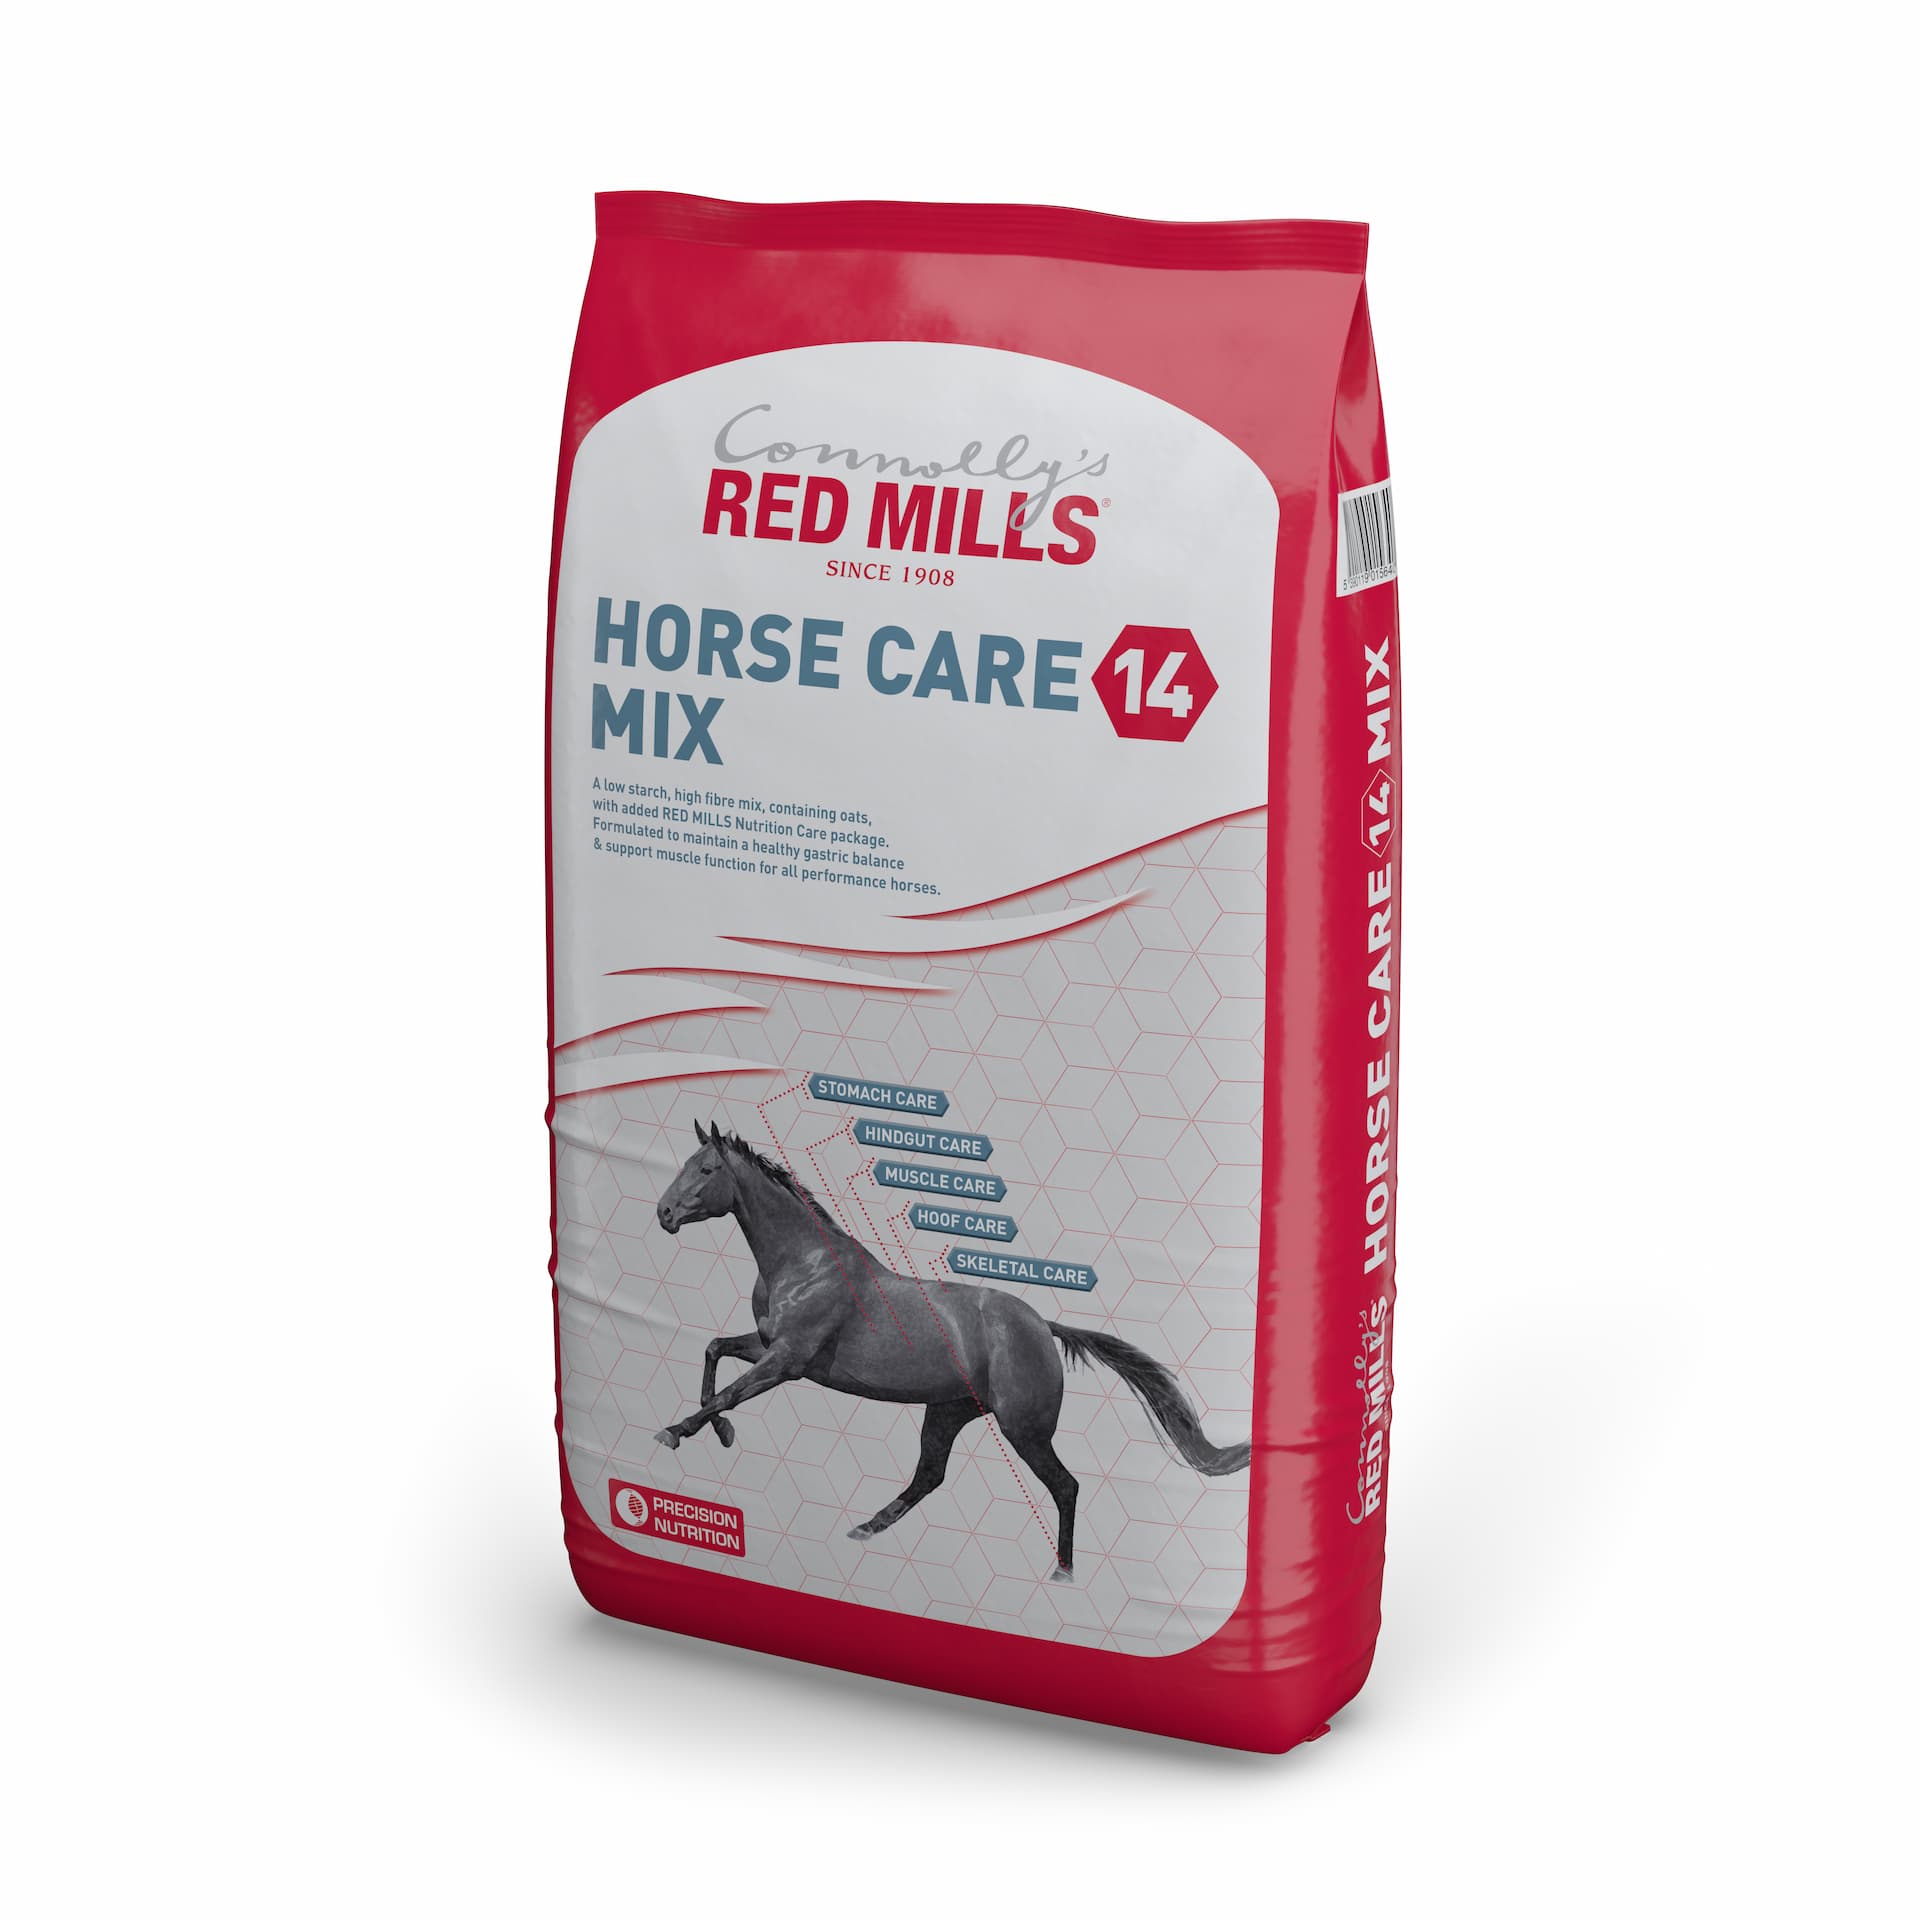 Horse Care 14 Mix